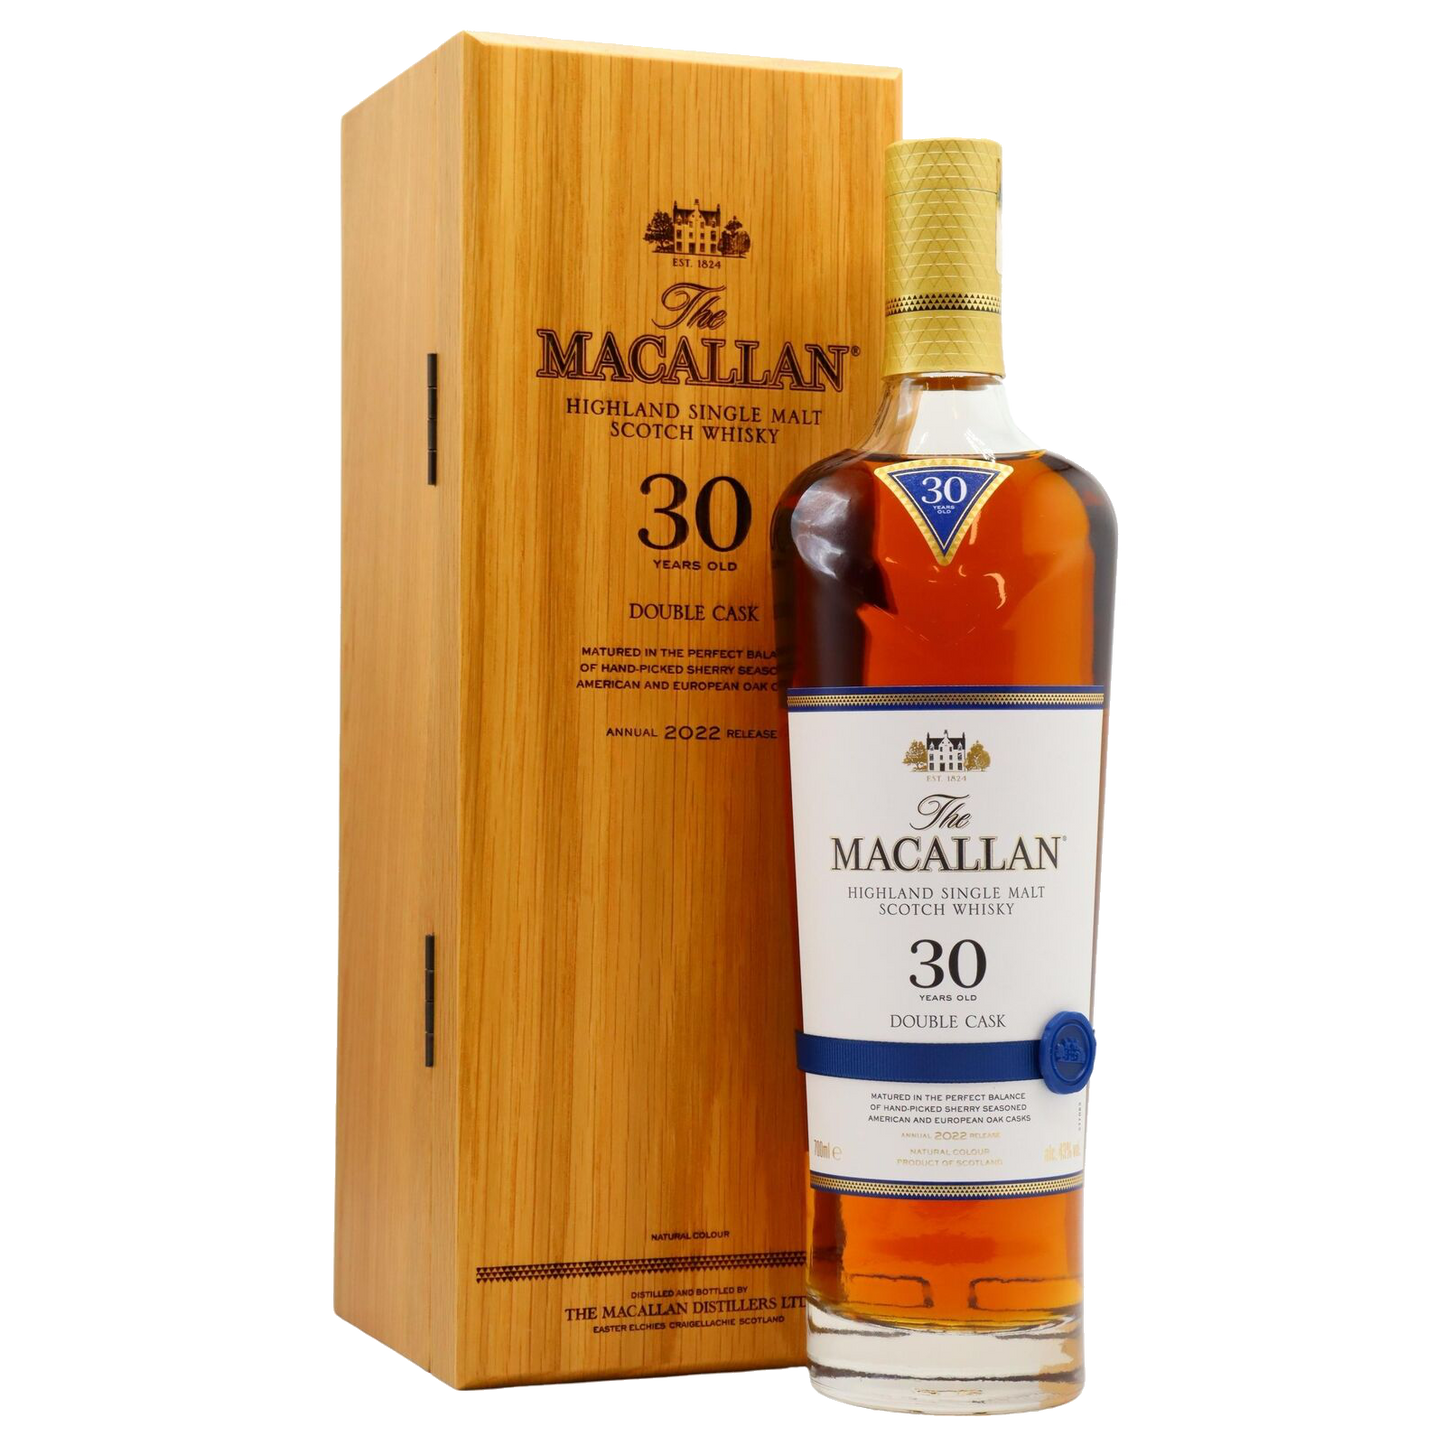 The Macallan 30 Year Old Double Cask (2022 Release)